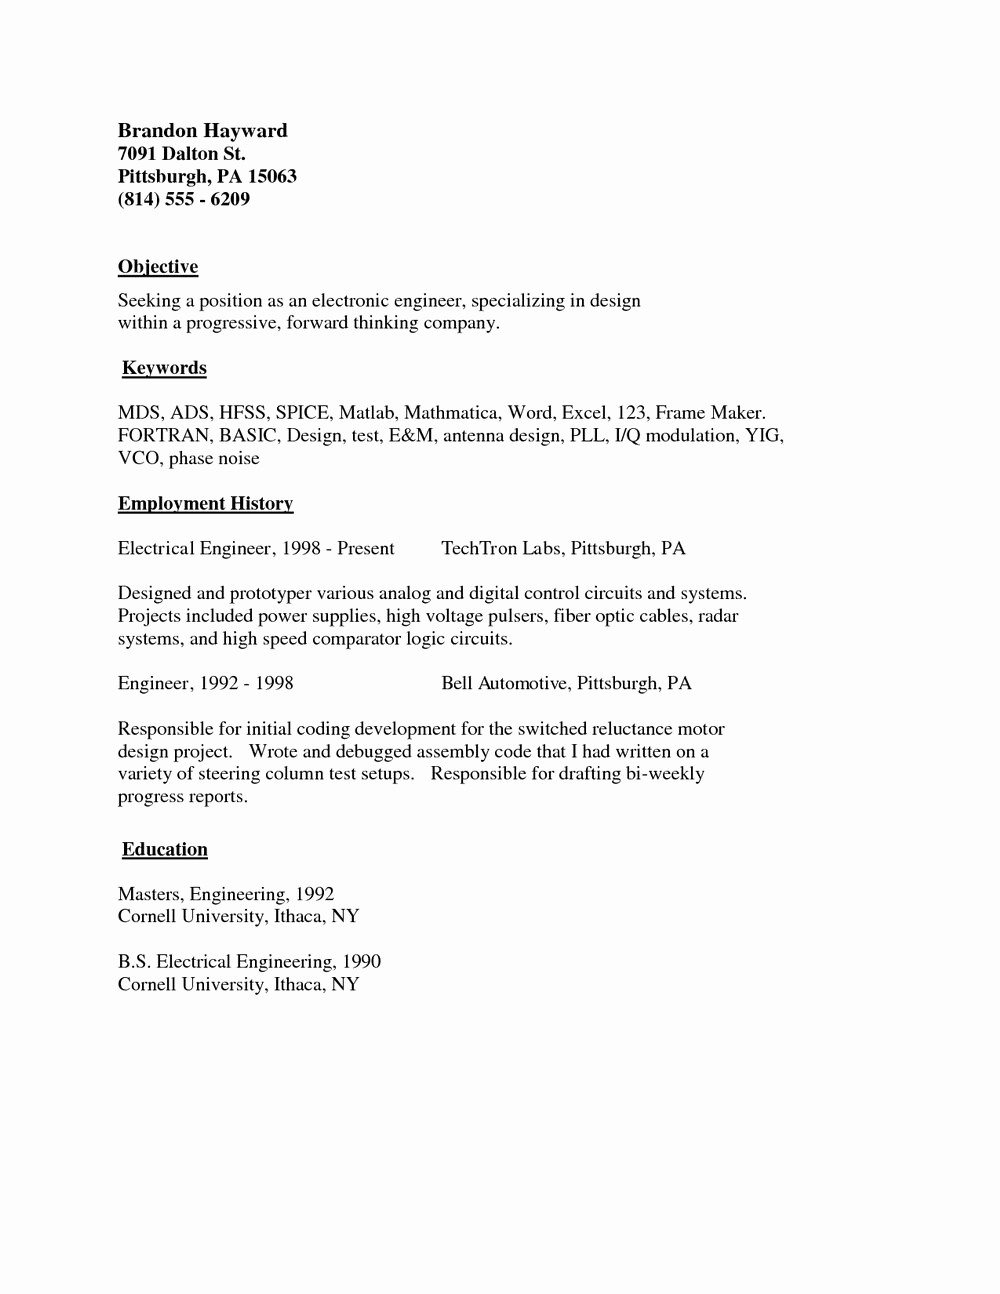 Simple Resume Examples for Jobs Inspirational Resume Basic Sample Simple Resume Examples Simple Job